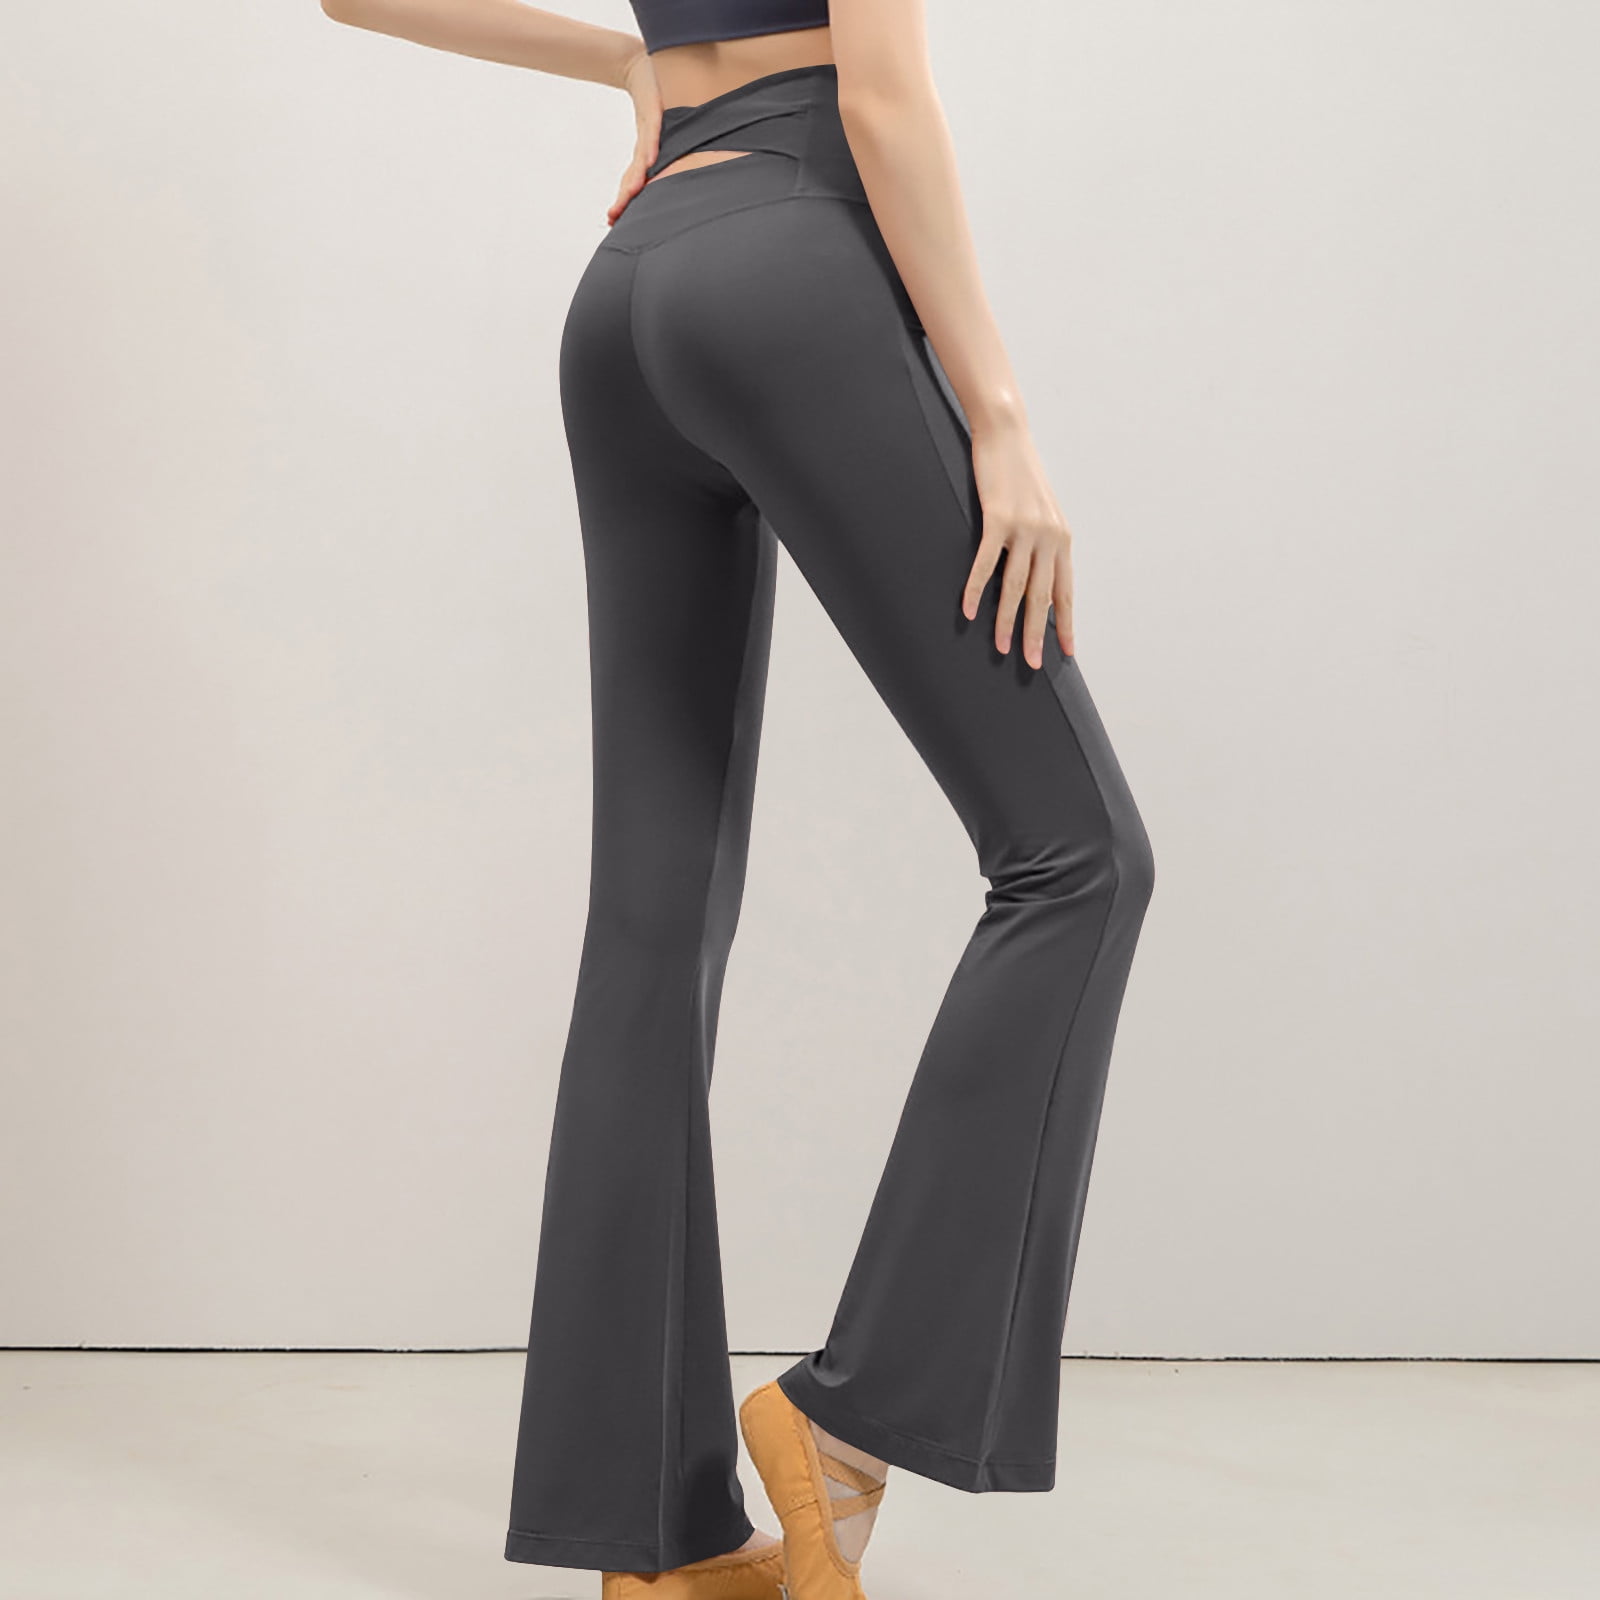 Buy NEW YOUNG Flare Leggings for Women-Black Bootcut Yoga Pants Crossover  High Waisted at Amazon.in